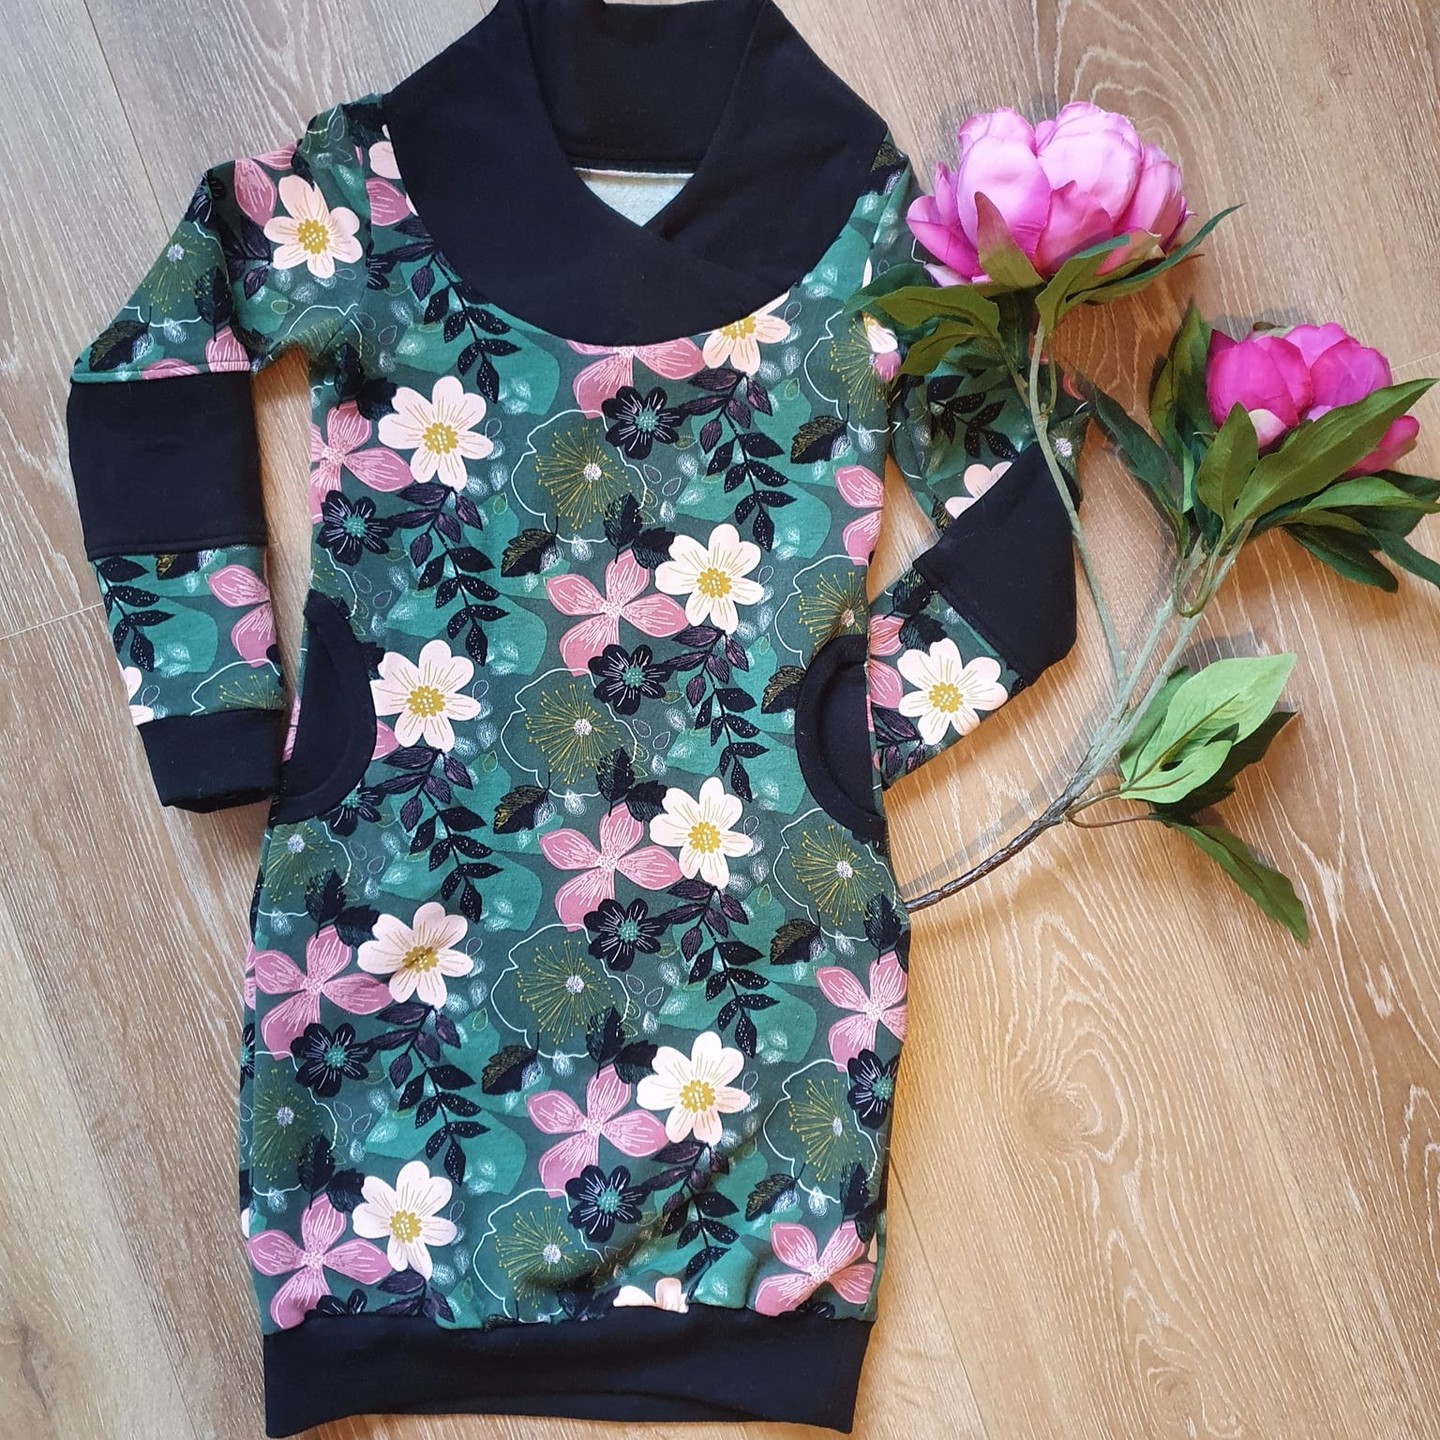 How absolutely gorgeous is this Vivax dress sewn up by Giselleke Kat? The colors in the fabric she chose are absolutely gorgeous!

#sewforgirls #sofilantjes #vivaxdress #wintersewing #winterfabric #floralknit #sewsewsew